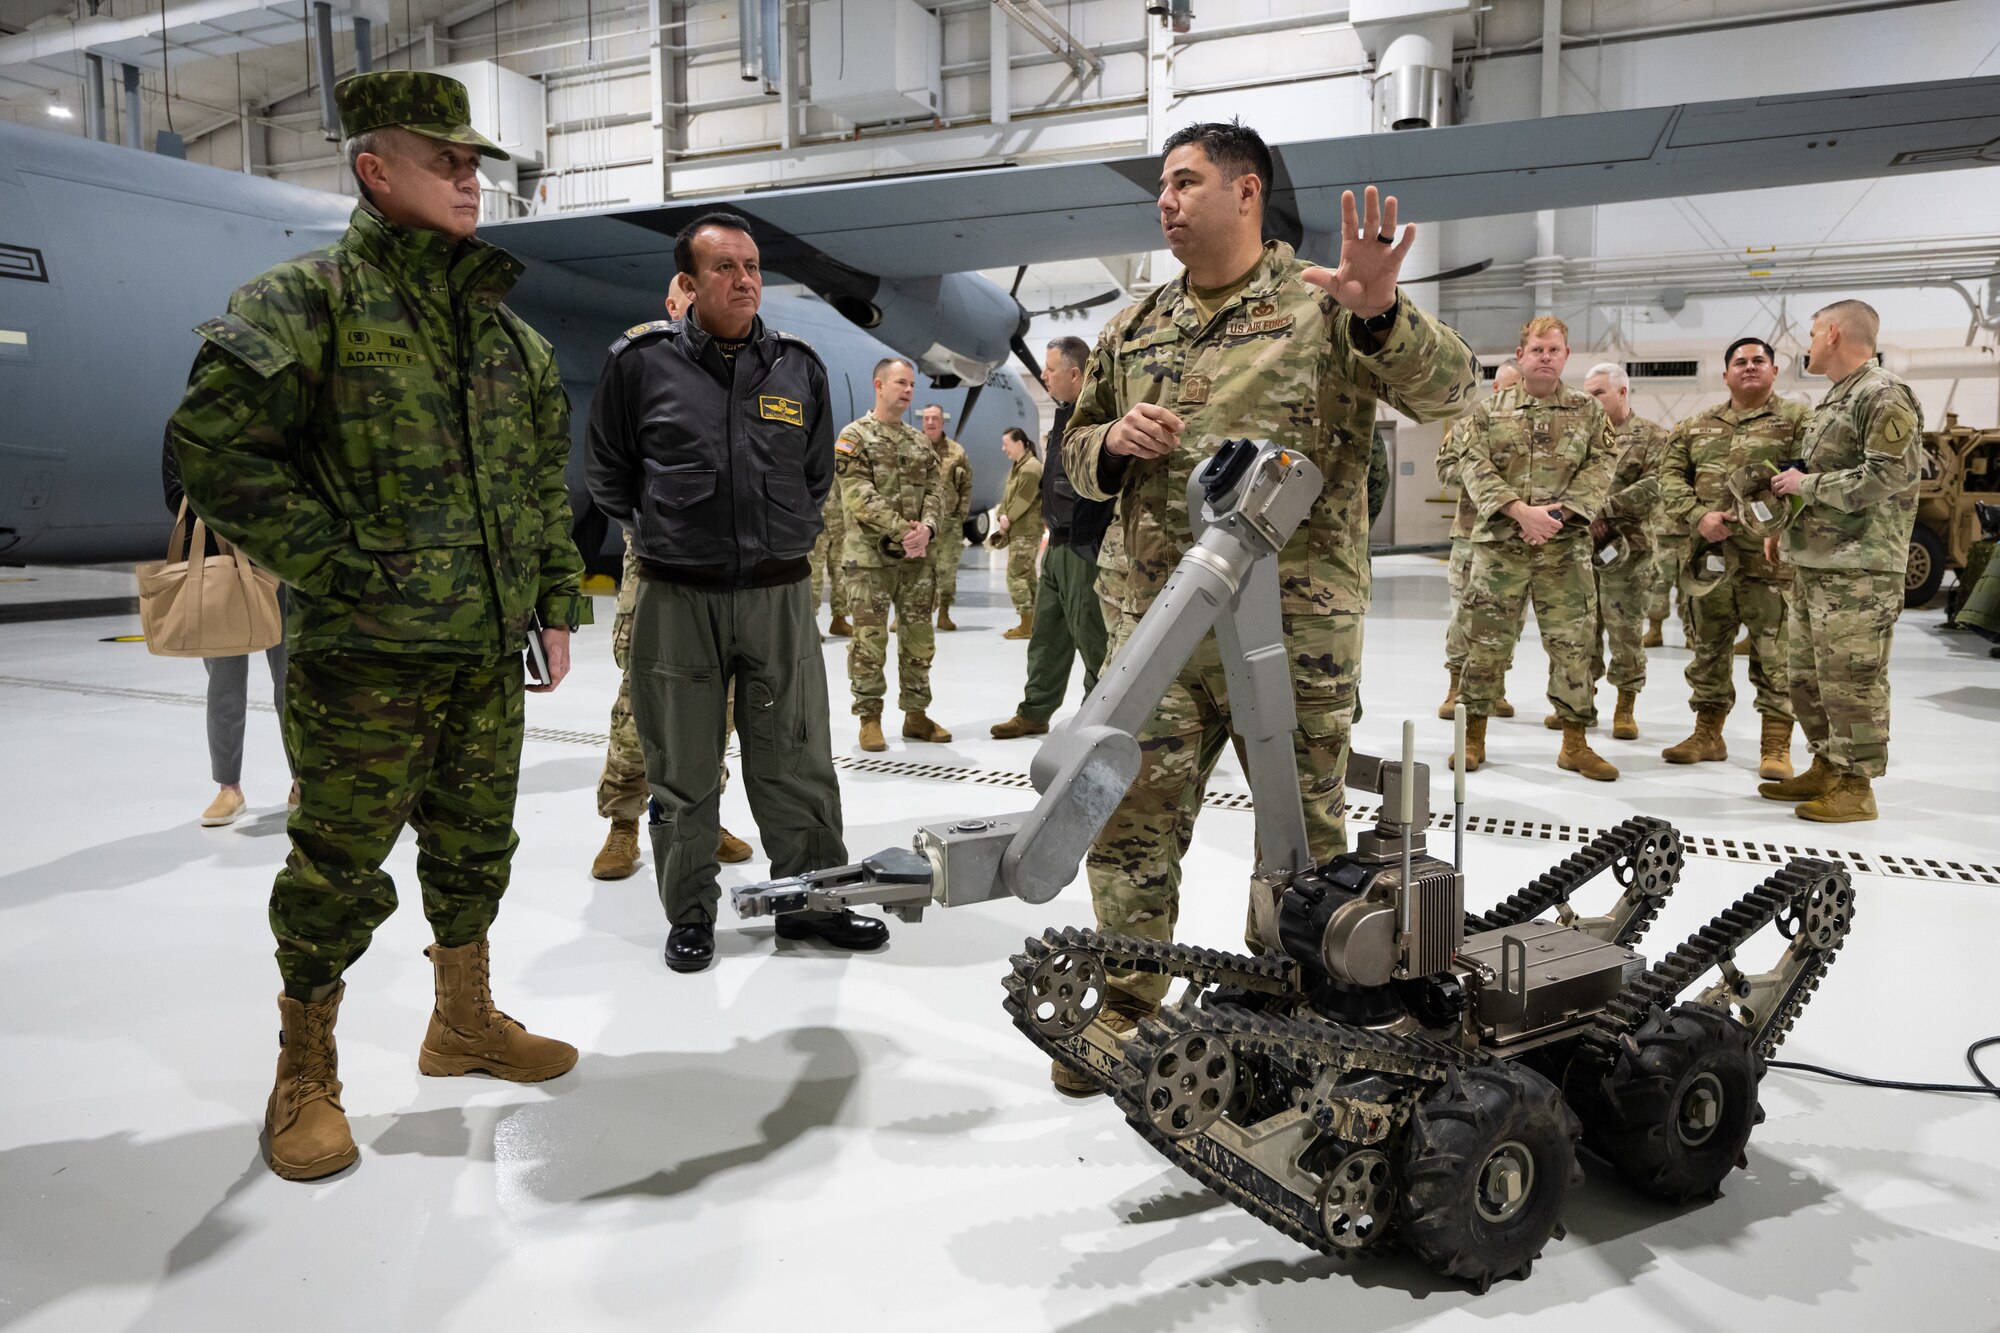 U.S. Air Force Chief Master Sgt. Matthew Wilt, right, superintendent of the Kentucky Air National Guard’s 123rd Explosive Ordnance Disposal Flight, demonstrates a remote-controlled EOD robot with Ecuadorian military leaders at the Kentucky Air National Guard Base in Louisville, Ky., Jan. 31, 2024. The Ecuadorians are visiting this week to exchange information with the Kentucky National Guard as part of the State Partnership Program, a National Guard Bureau effort that pairs Guard units with foreign allies to foster enhanced understanding across all aspects of civil and military affairs. (U.S. Air National Guard photo by Dale Greer)